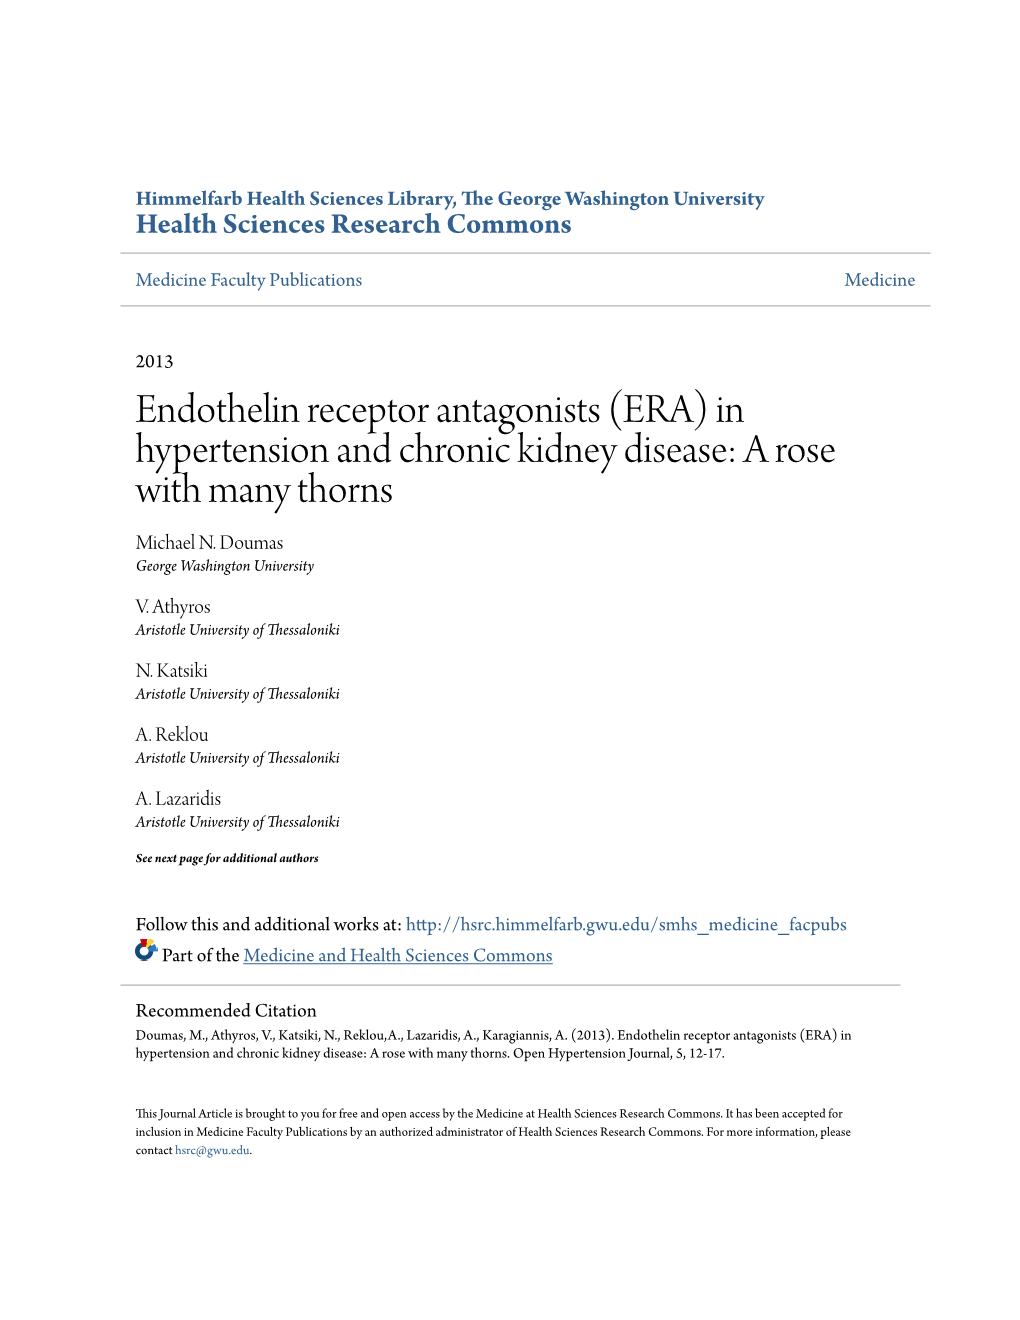 Endothelin Receptor Antagonists (ERA) in Hypertension and Chronic Kidney Disease: a Rose with Many Thorns Michael N